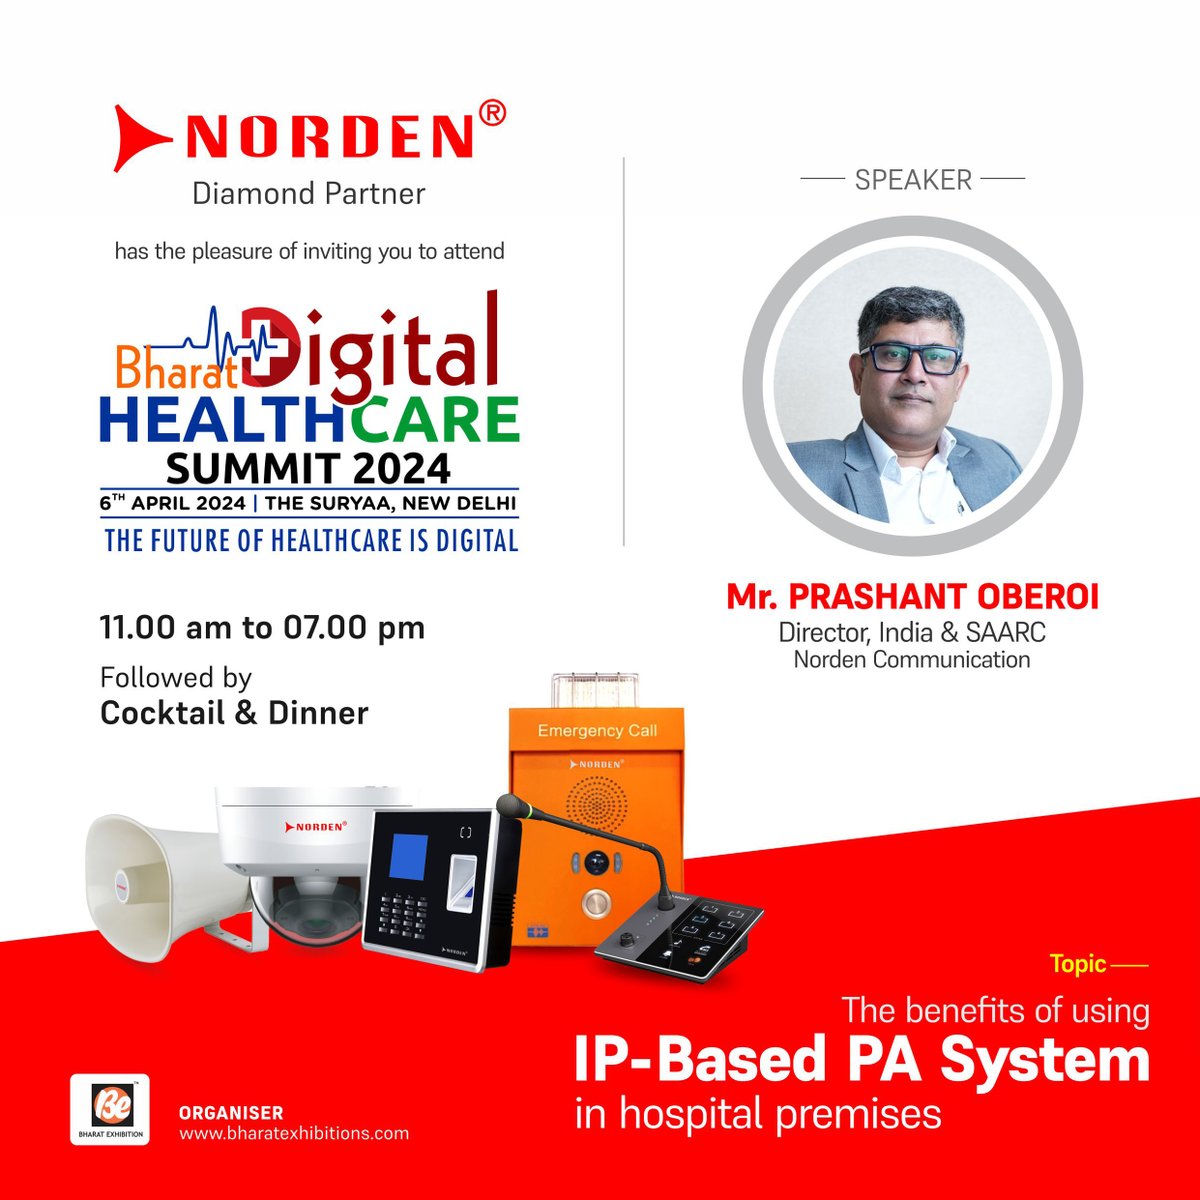 As a diamond partner, Norden will be presenting at the Bharat Digital Health Care Summit 2024, featuring our tailored IP-based PA Systems. Connect with us to enhance healthcare facility efficiency and security

#DigitalHealthSummit2024#HealthcareTechSolutions#Nordencommunication